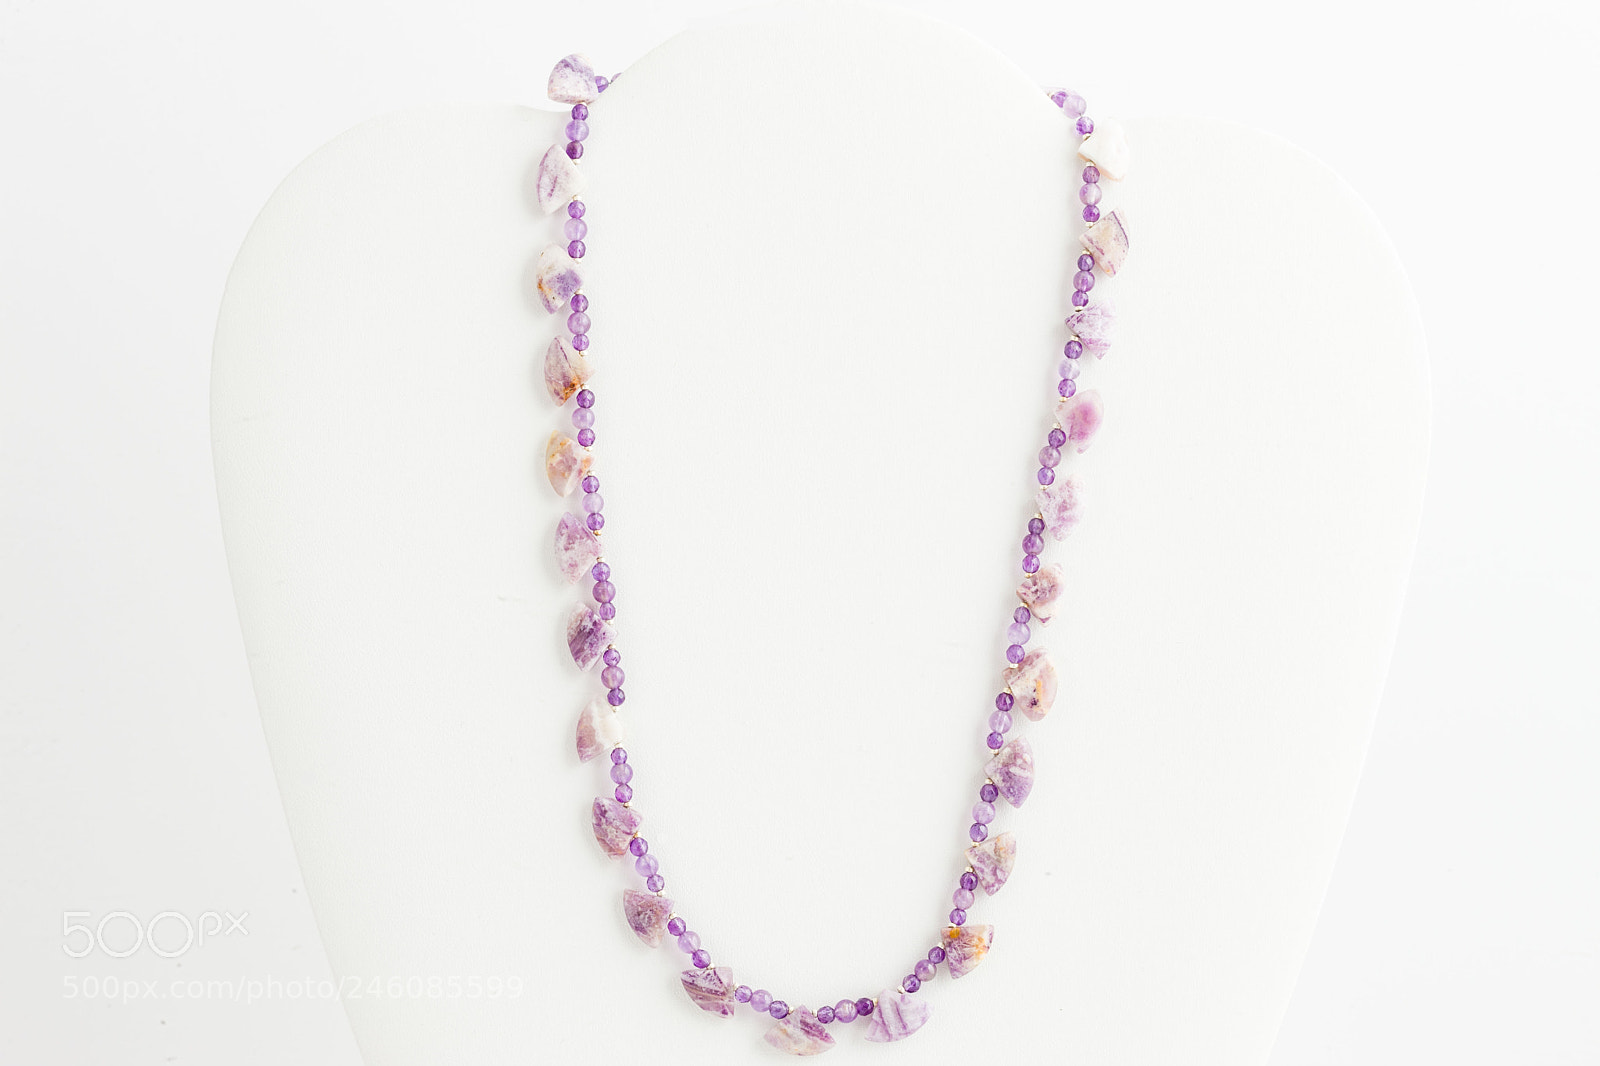 Canon EOS-1Ds Mark III sample photo. Lavendar necklace constructed with photography